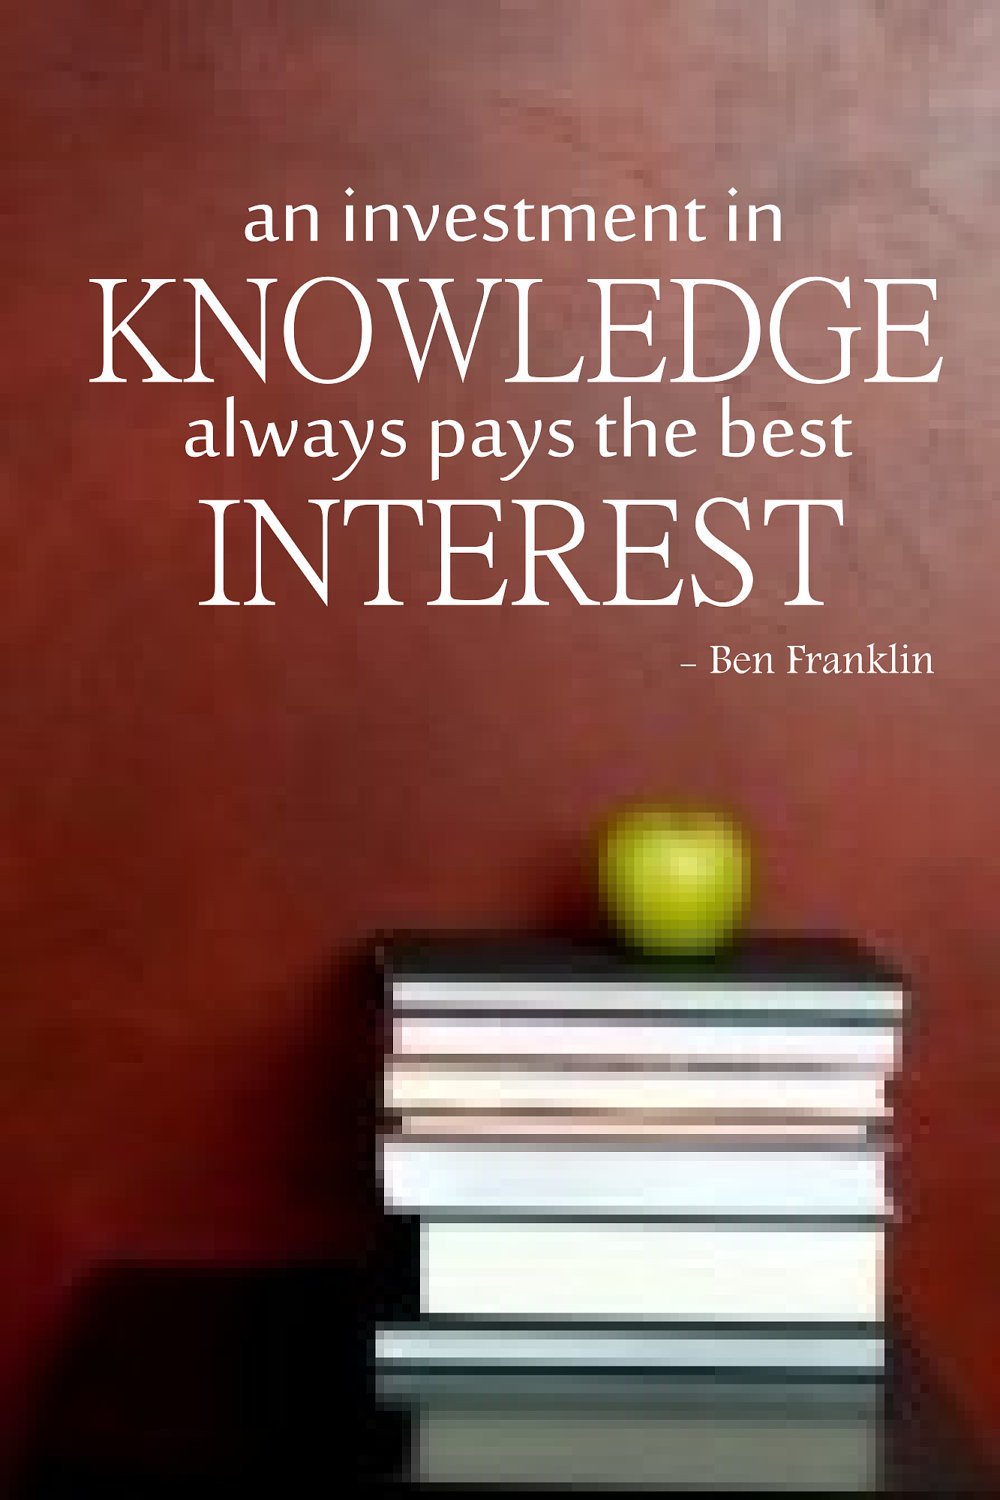 Quotes About Education Importance
 Quotes About Education Importance QuotesGram